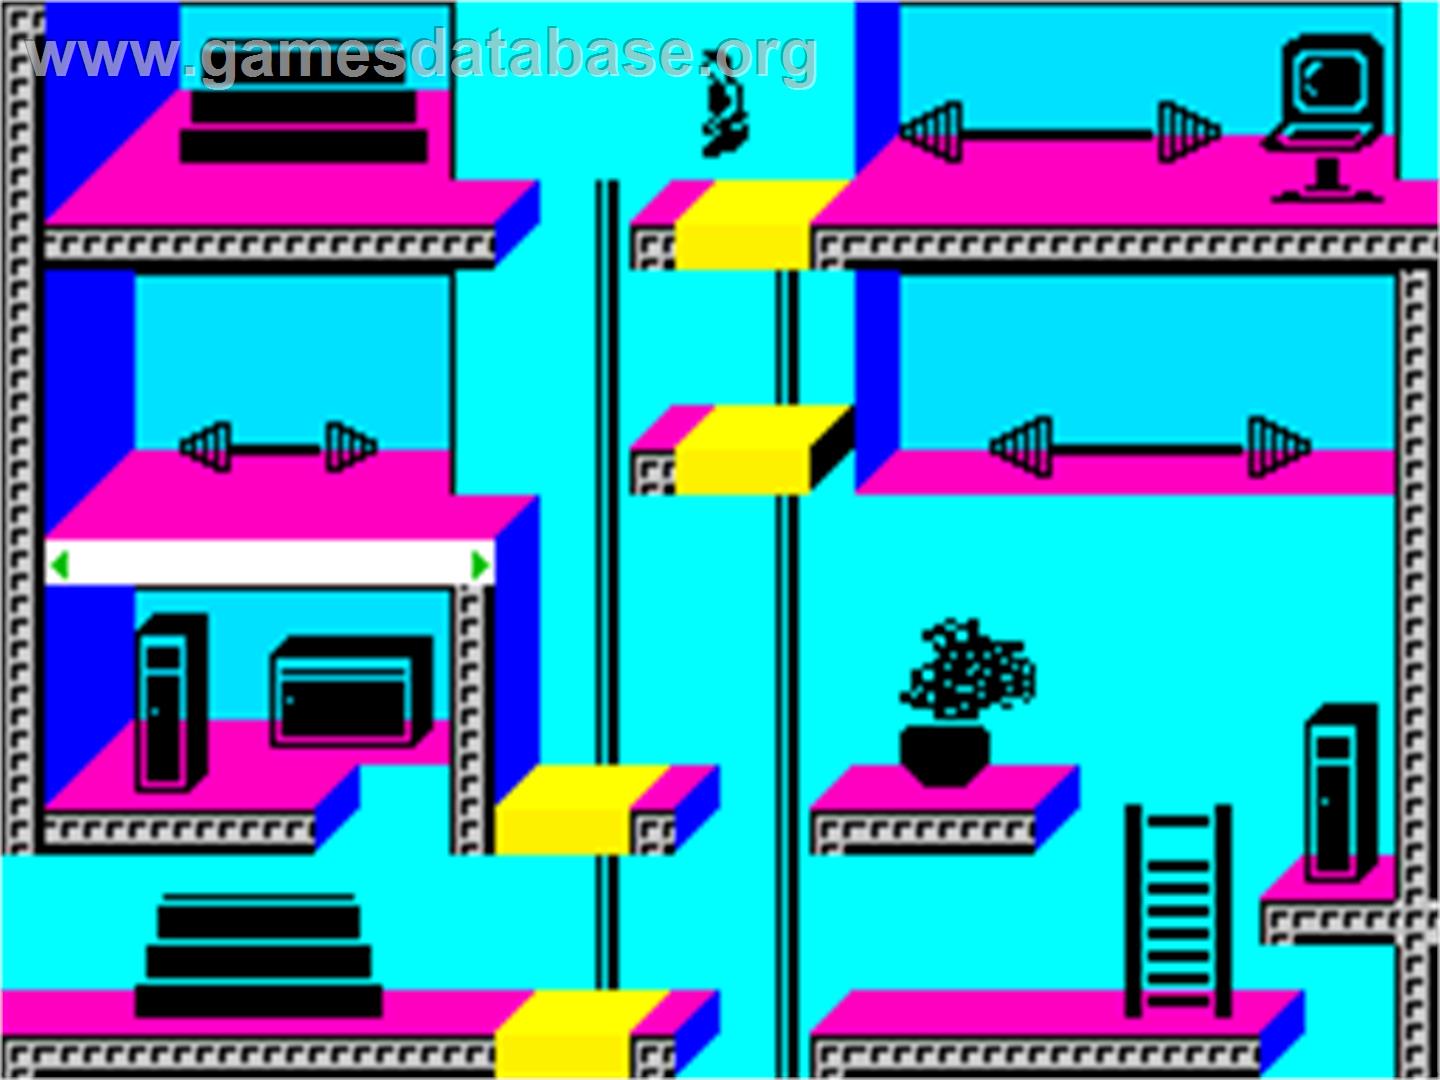 Impossible Mission II - Sinclair ZX Spectrum - Artwork - Title Screen